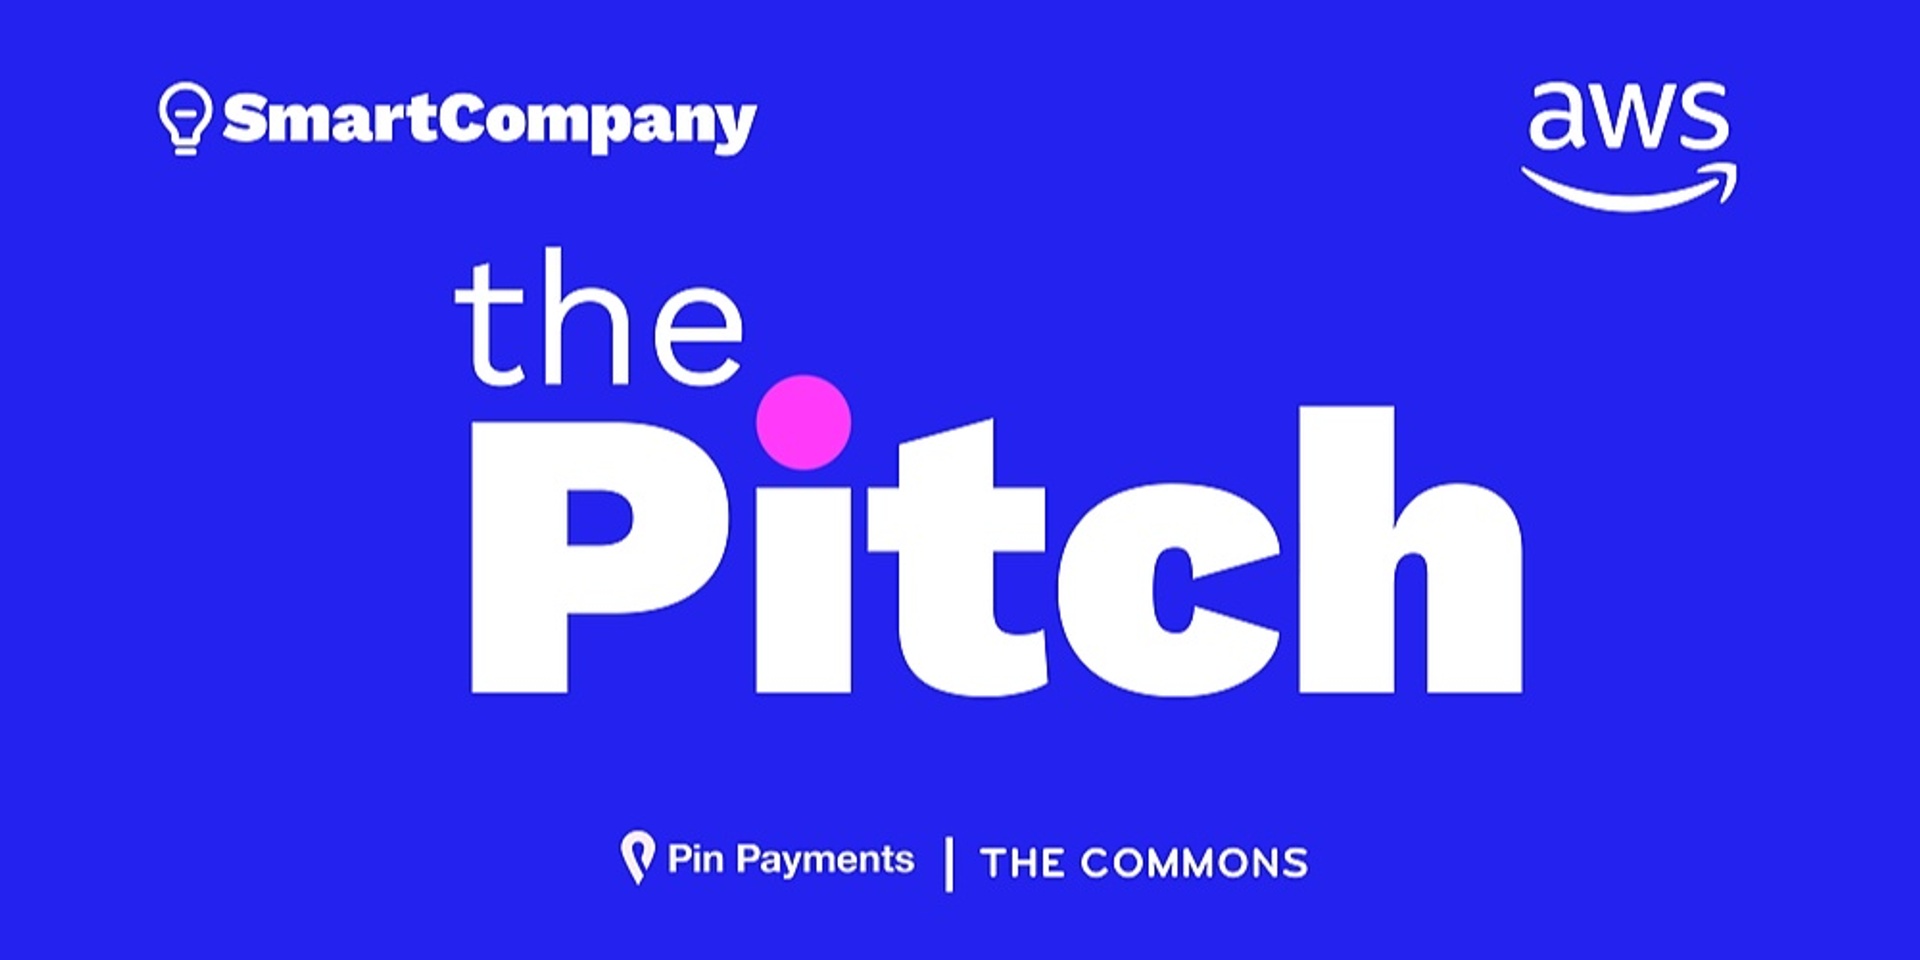 the Pitch - SmartCompany, AWS, Pin Payments & The Commons